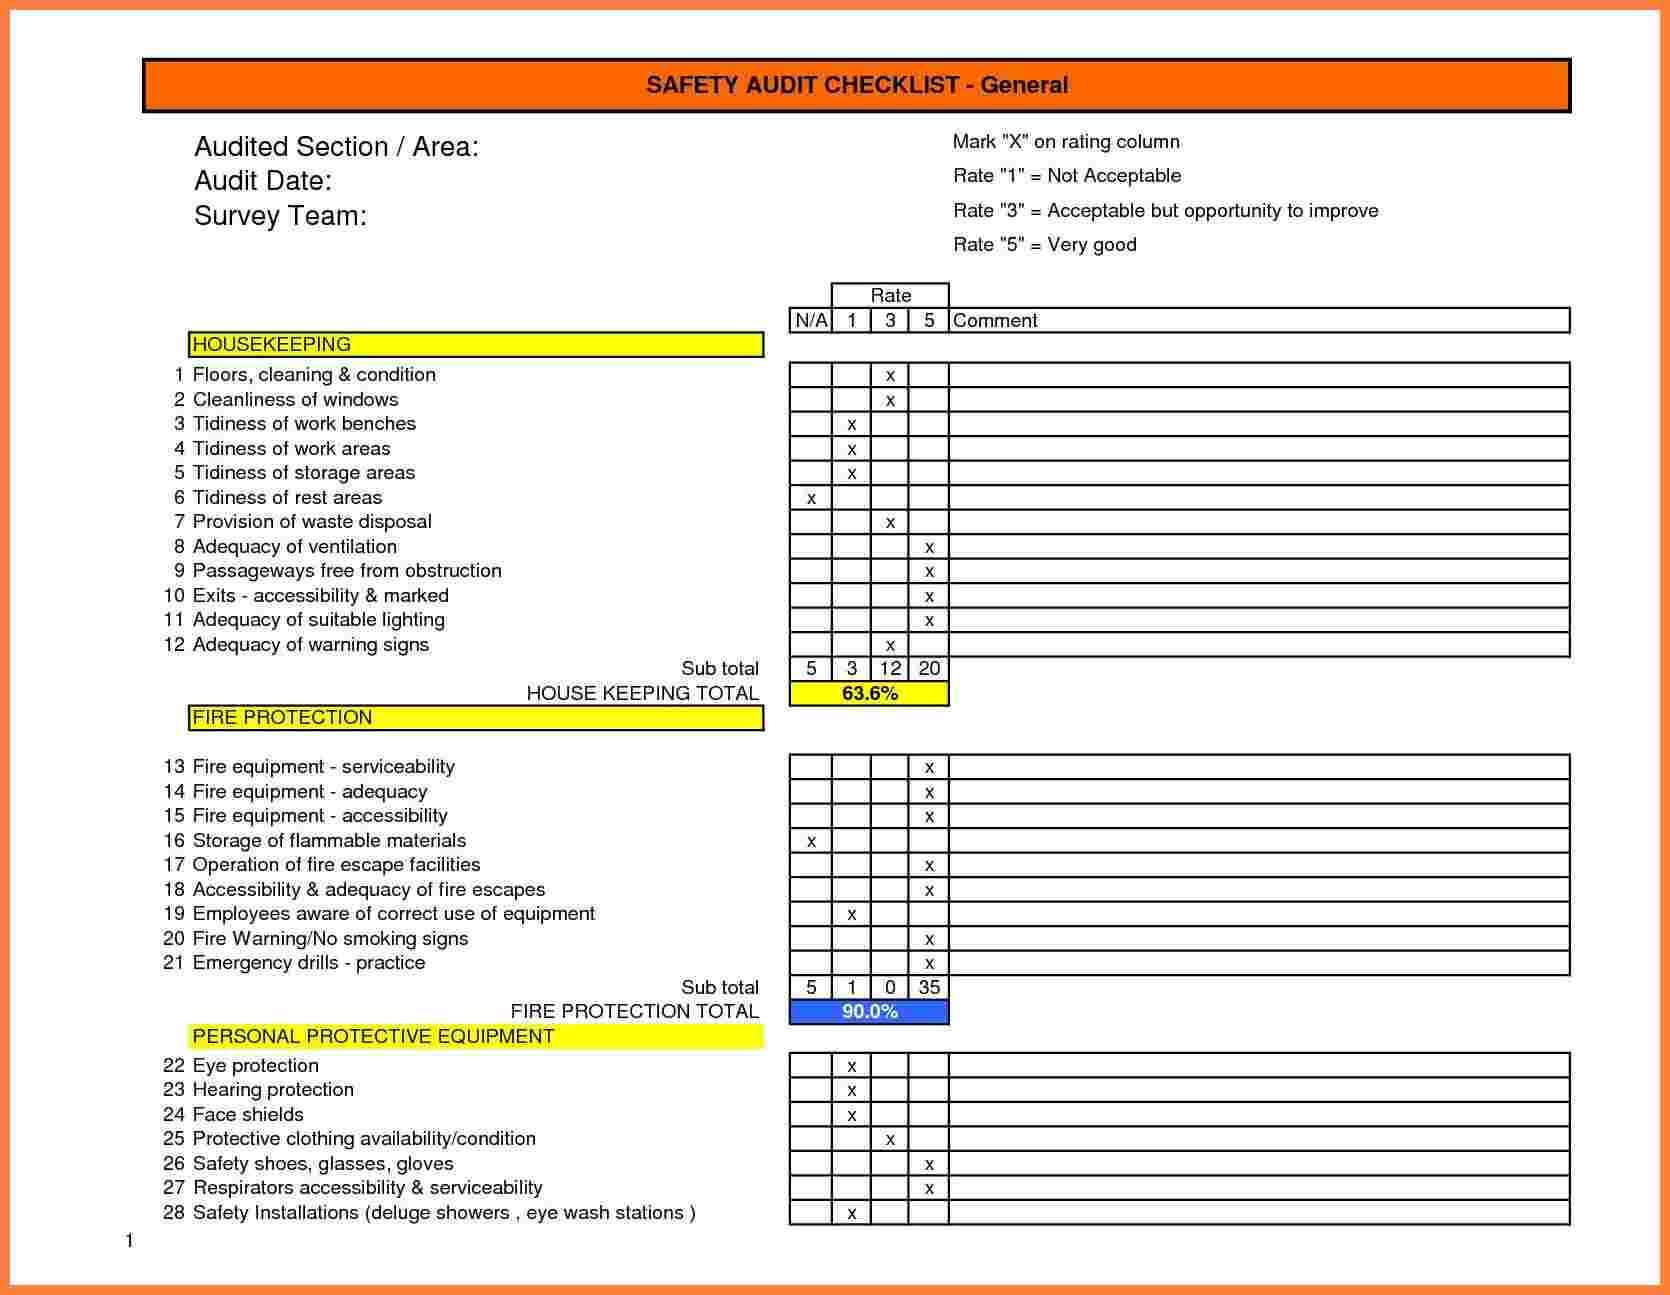 Image Result For Warehouse Health And Safety Audit Form Inside Safety Analysis Report Template